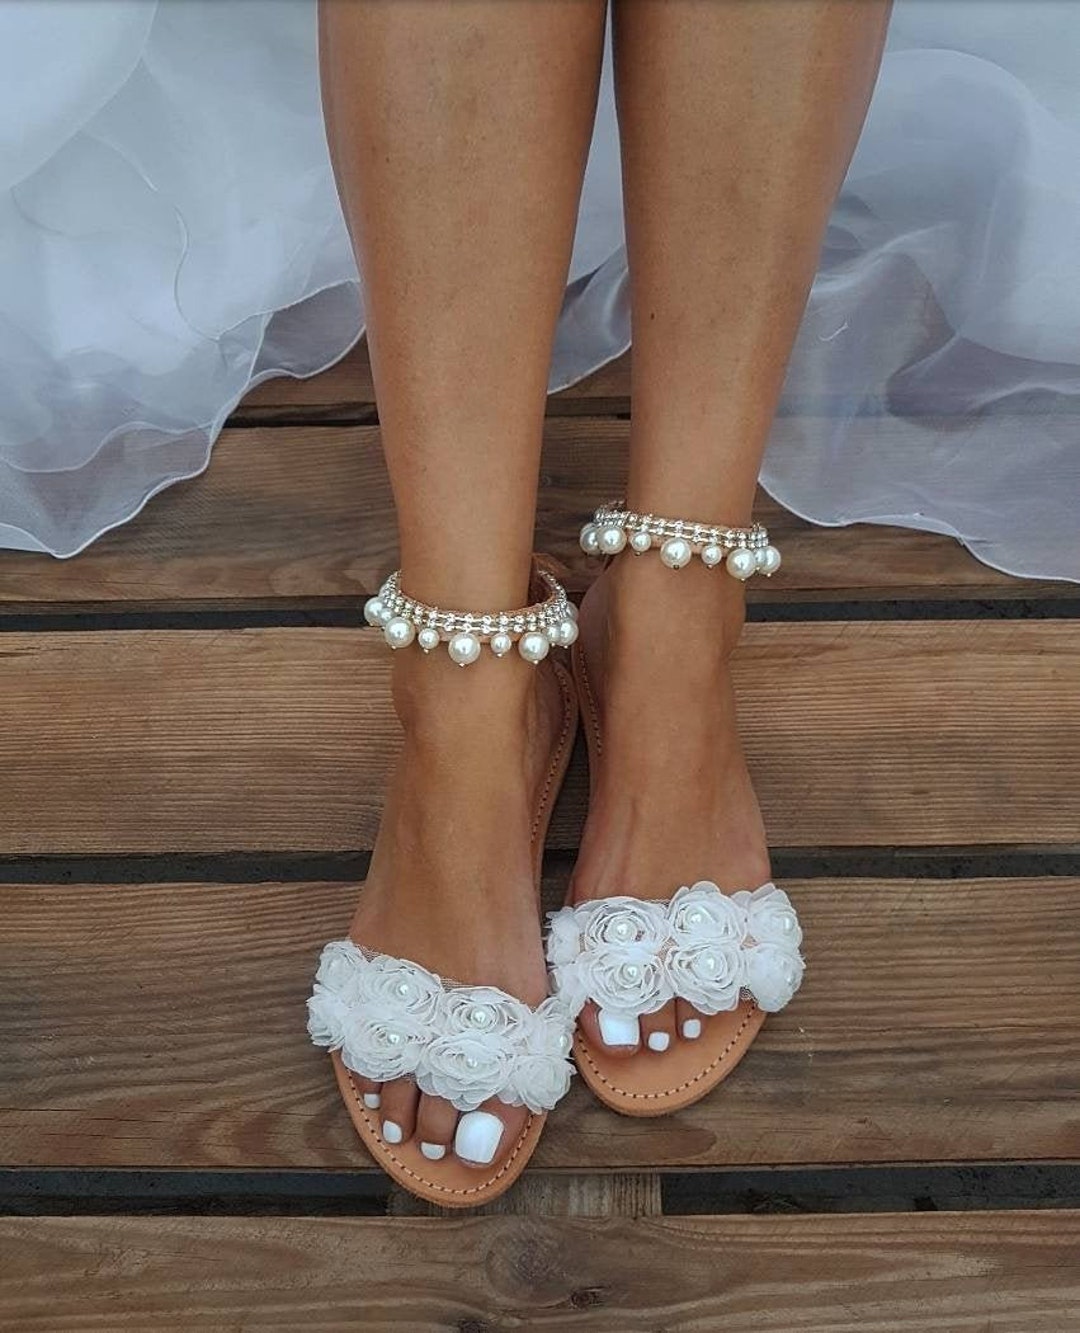 Miss Dominican Republic's Feet Glow With Bling at Miss Universe